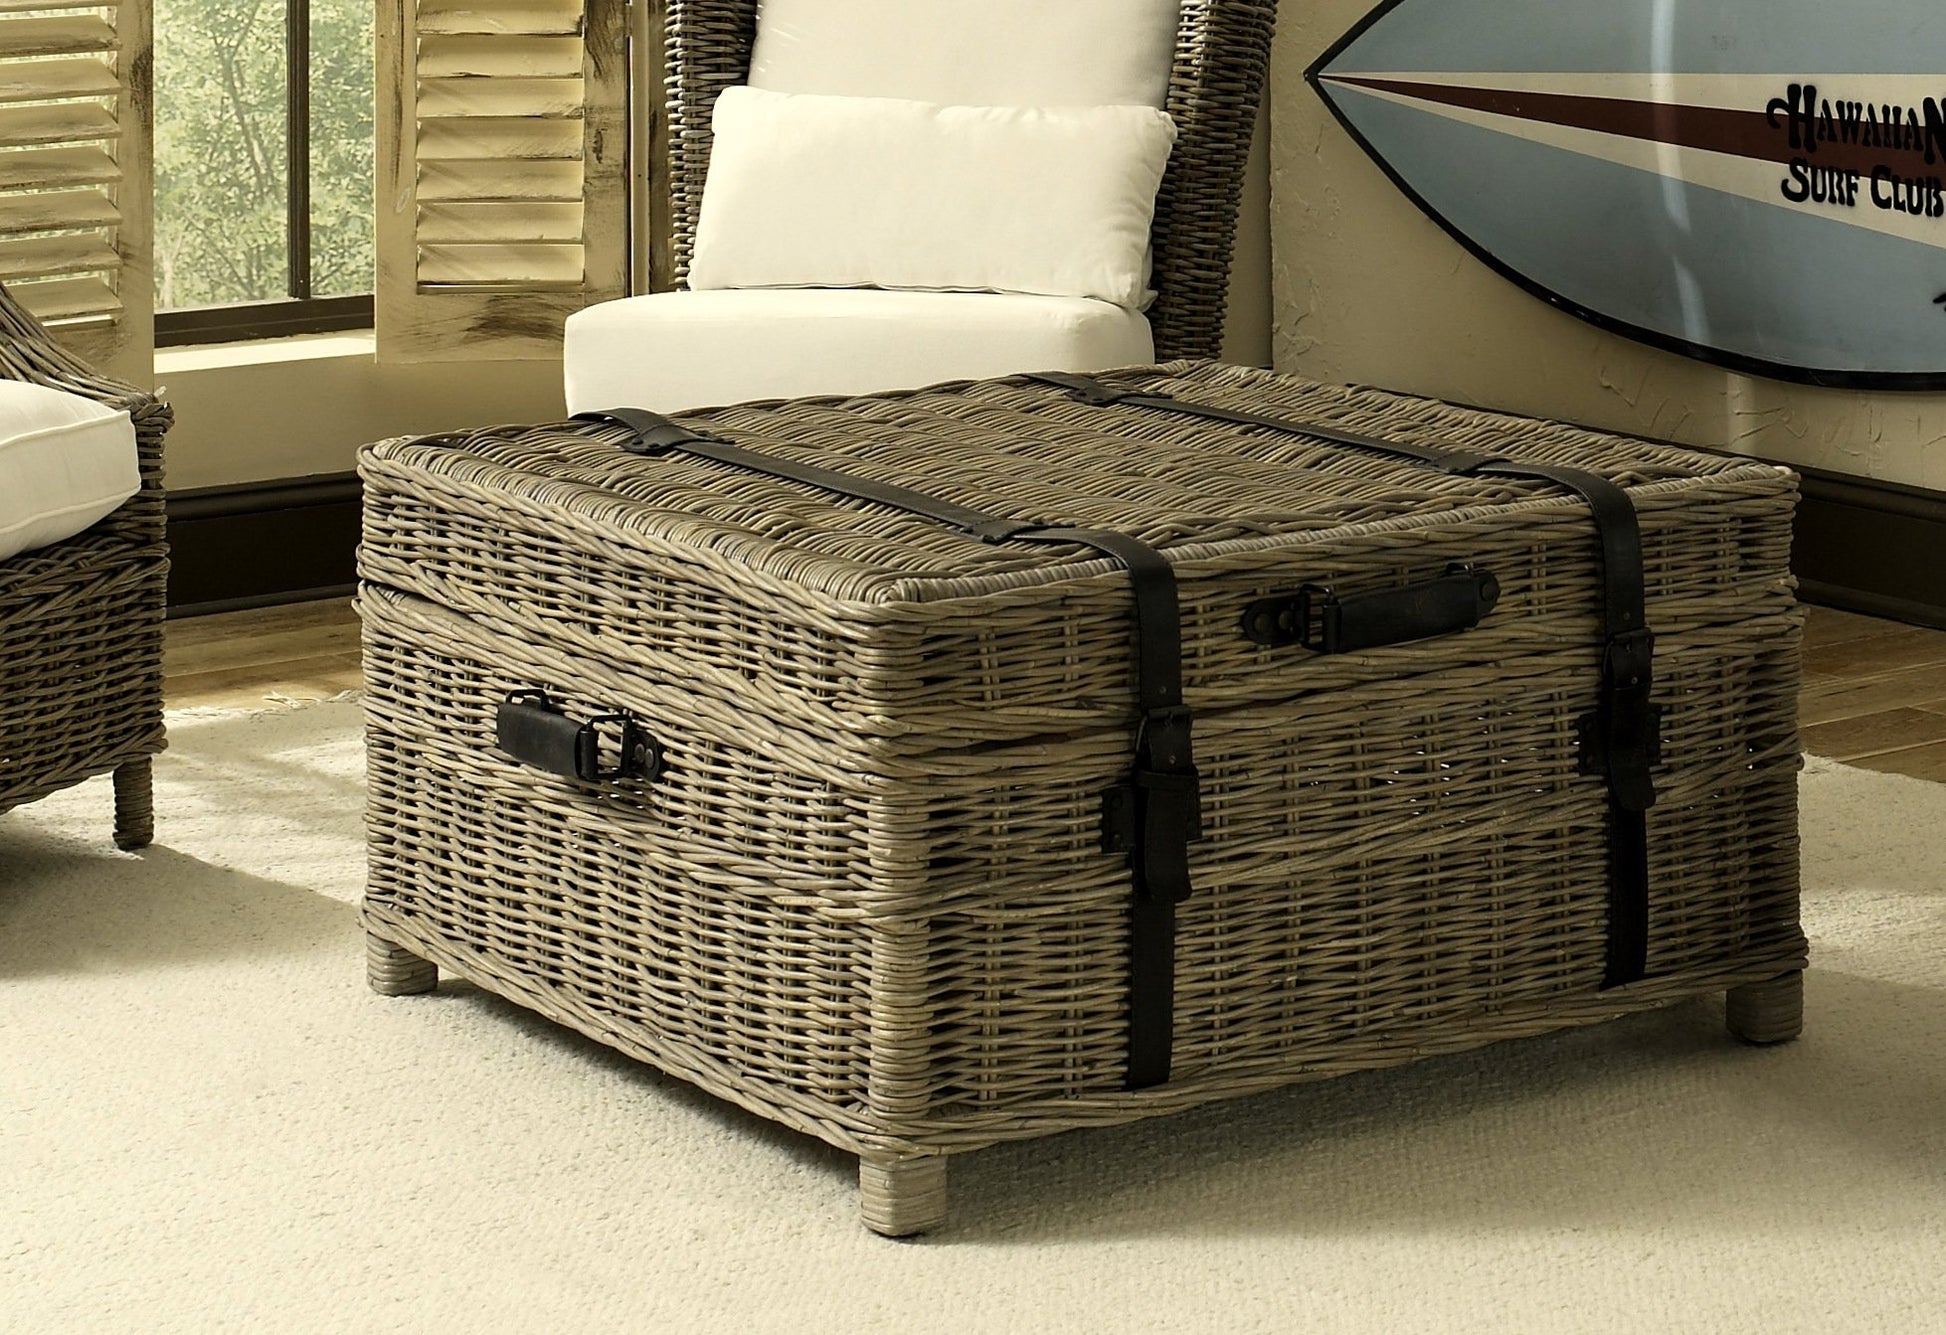 Padma's Plantation Woven Coffee Table Trunk